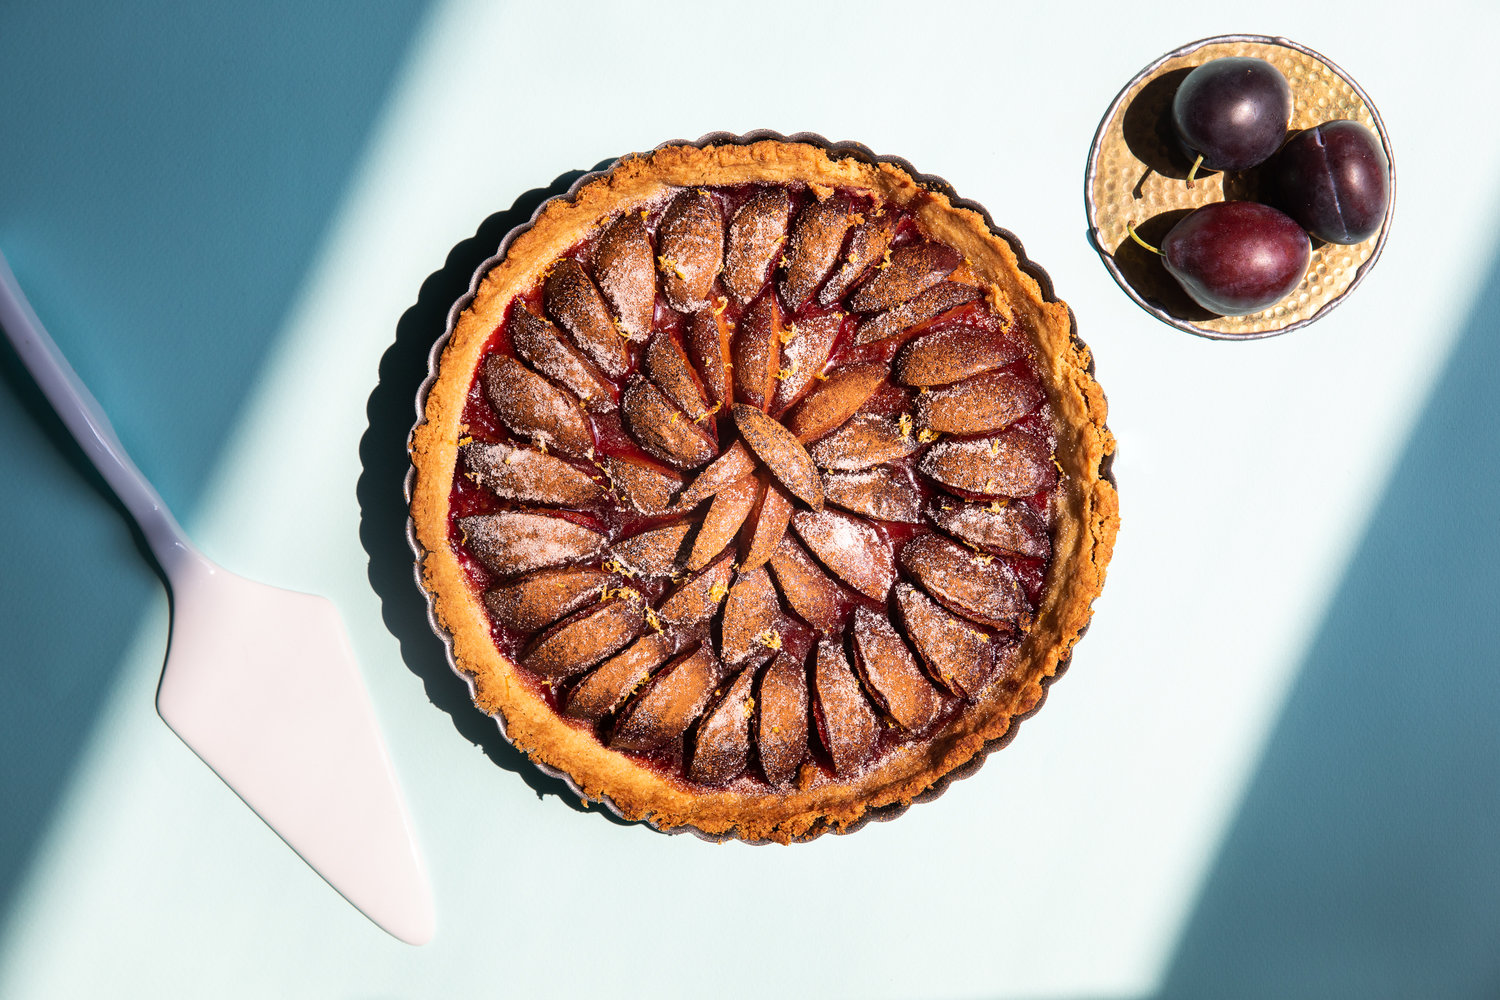 Plum tart on light blue background with small plate of plums next to it